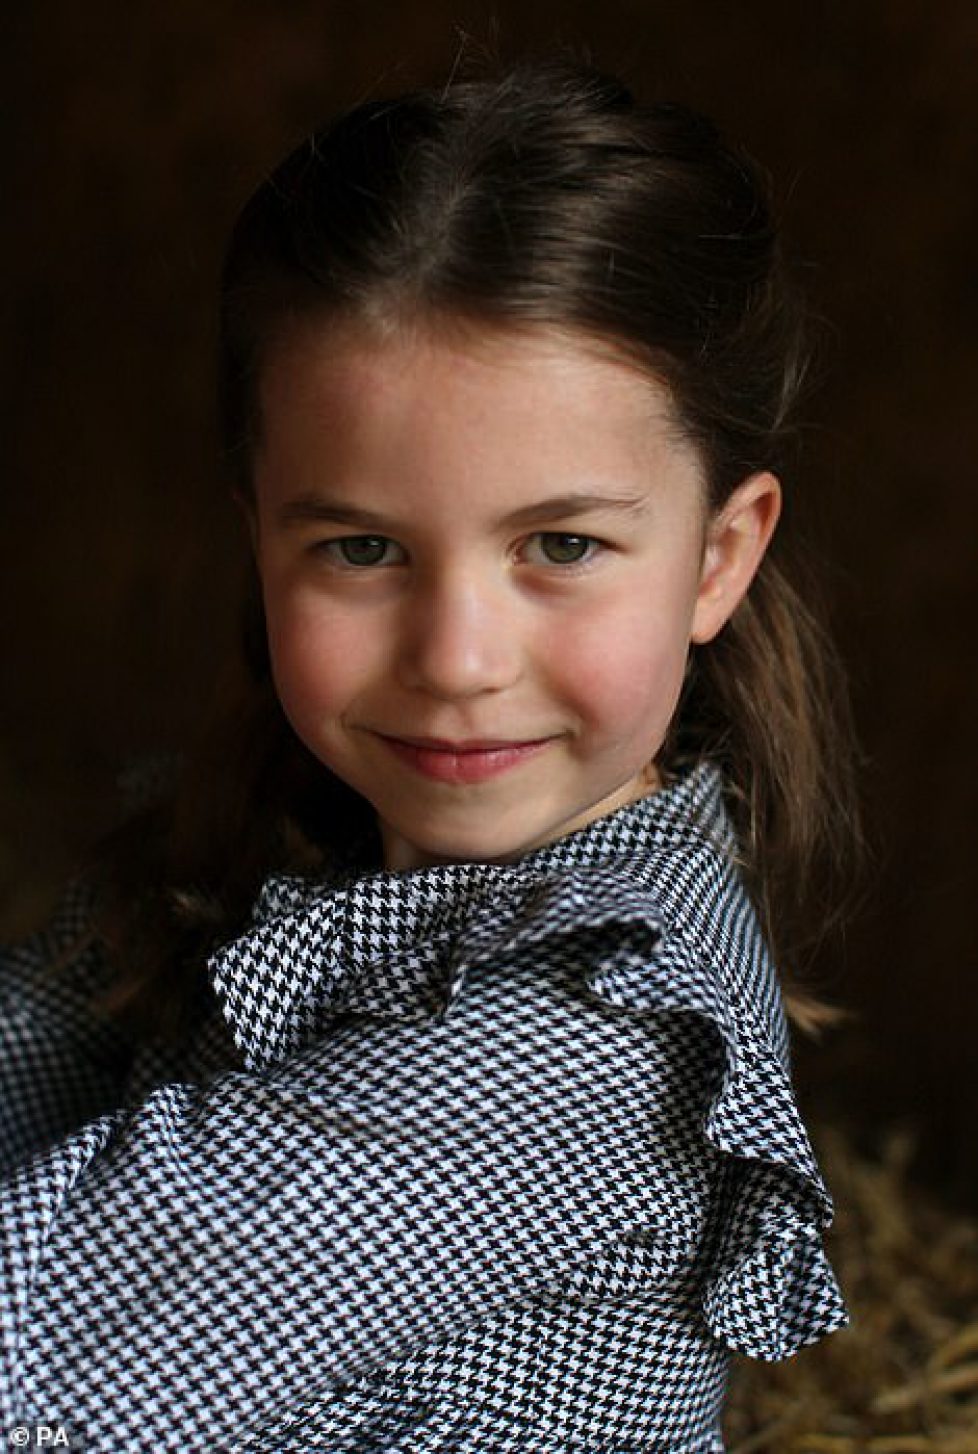 27902474-8279093-The_young_Princess_Charlotte_poses_for_a_photograph_taken_by_her-a-31_1588366160836